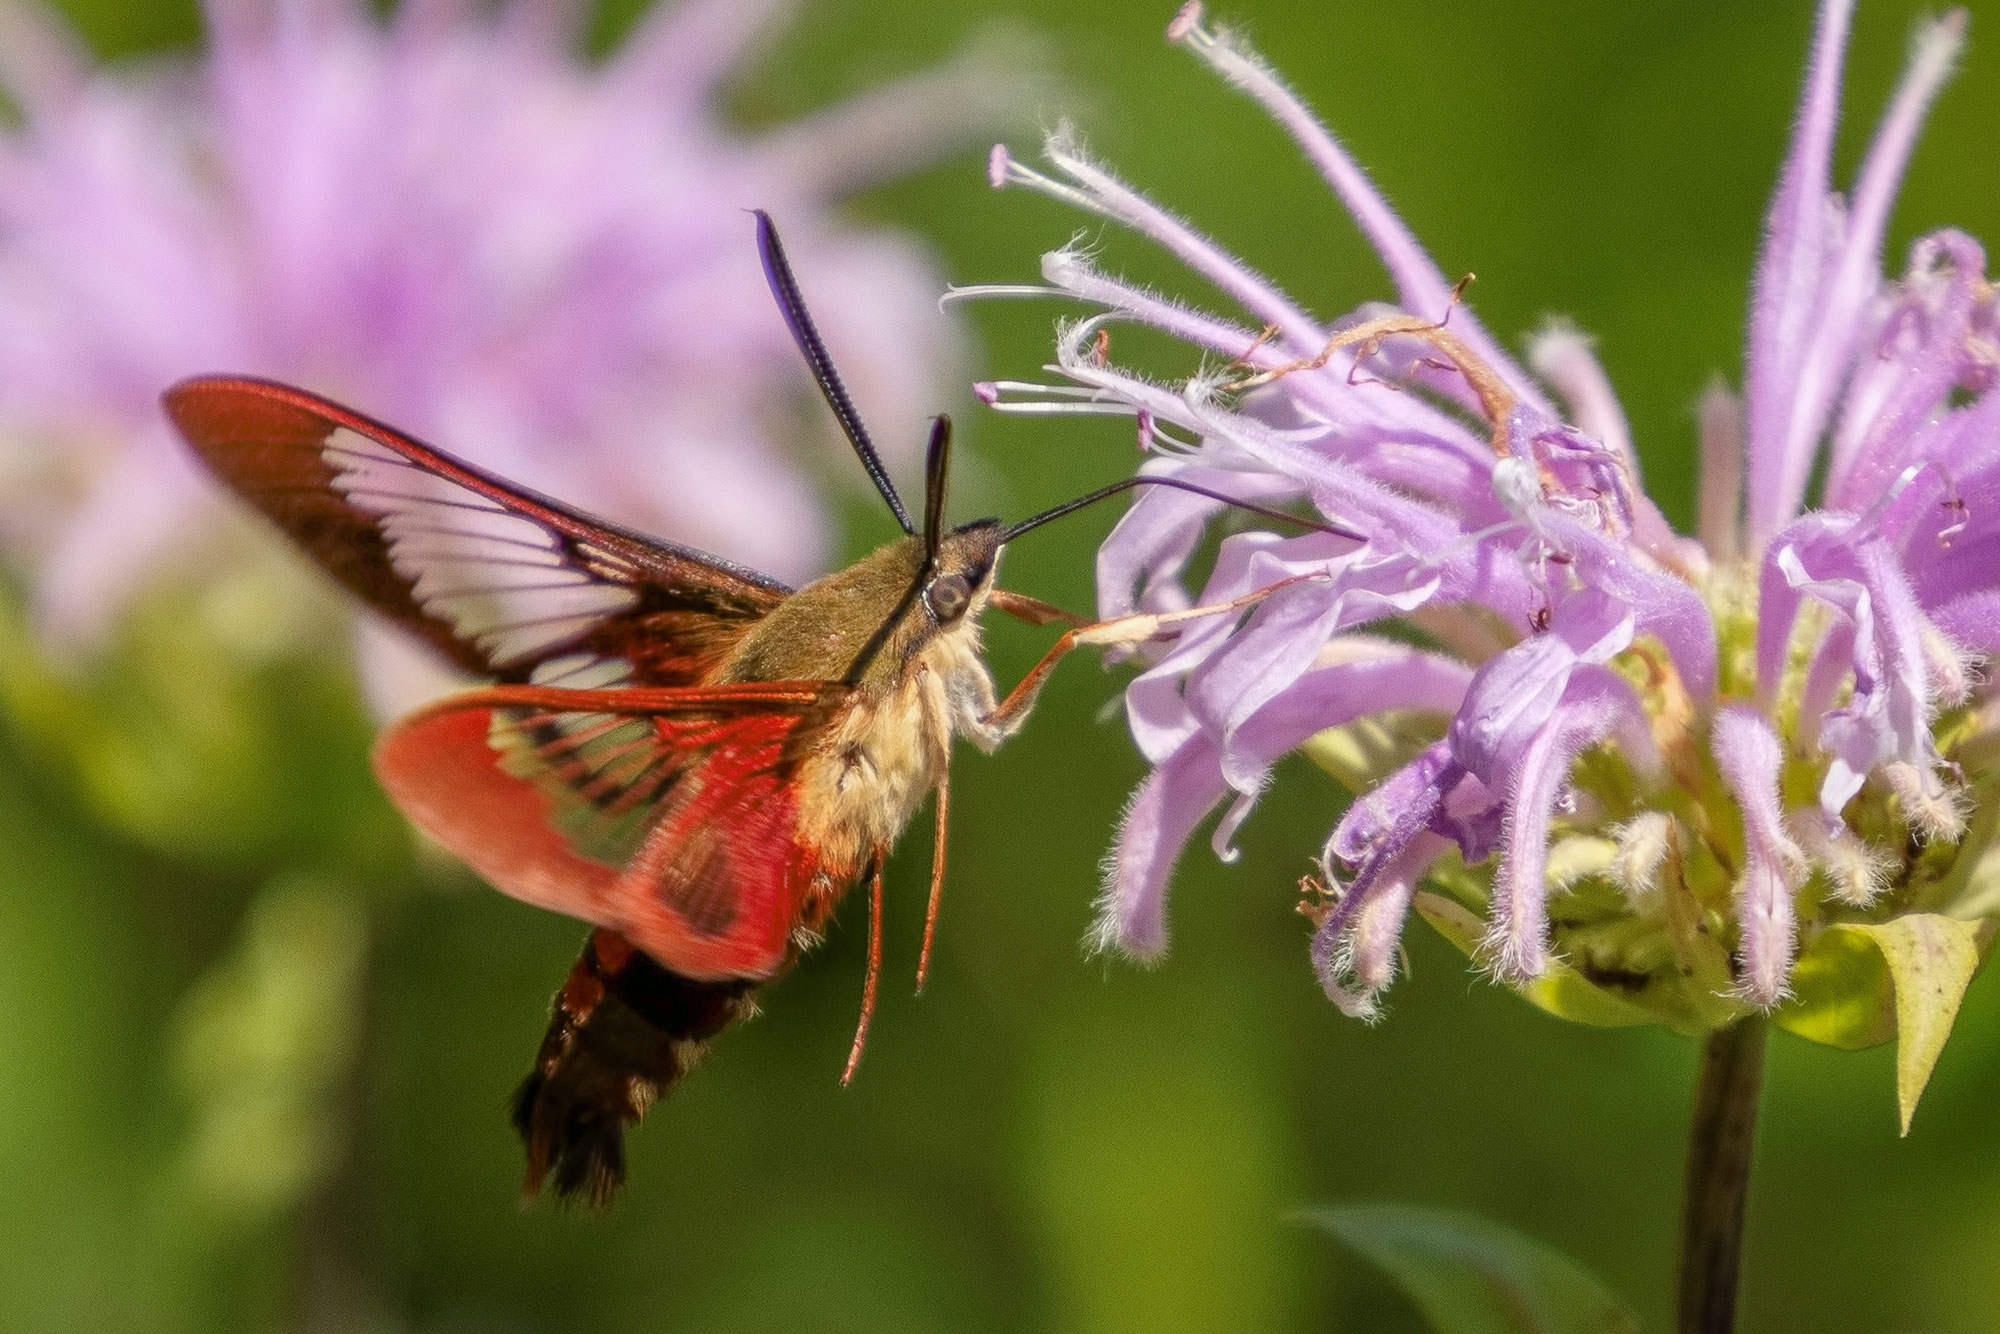 Hummingbird moth sipping nectar from a flower.